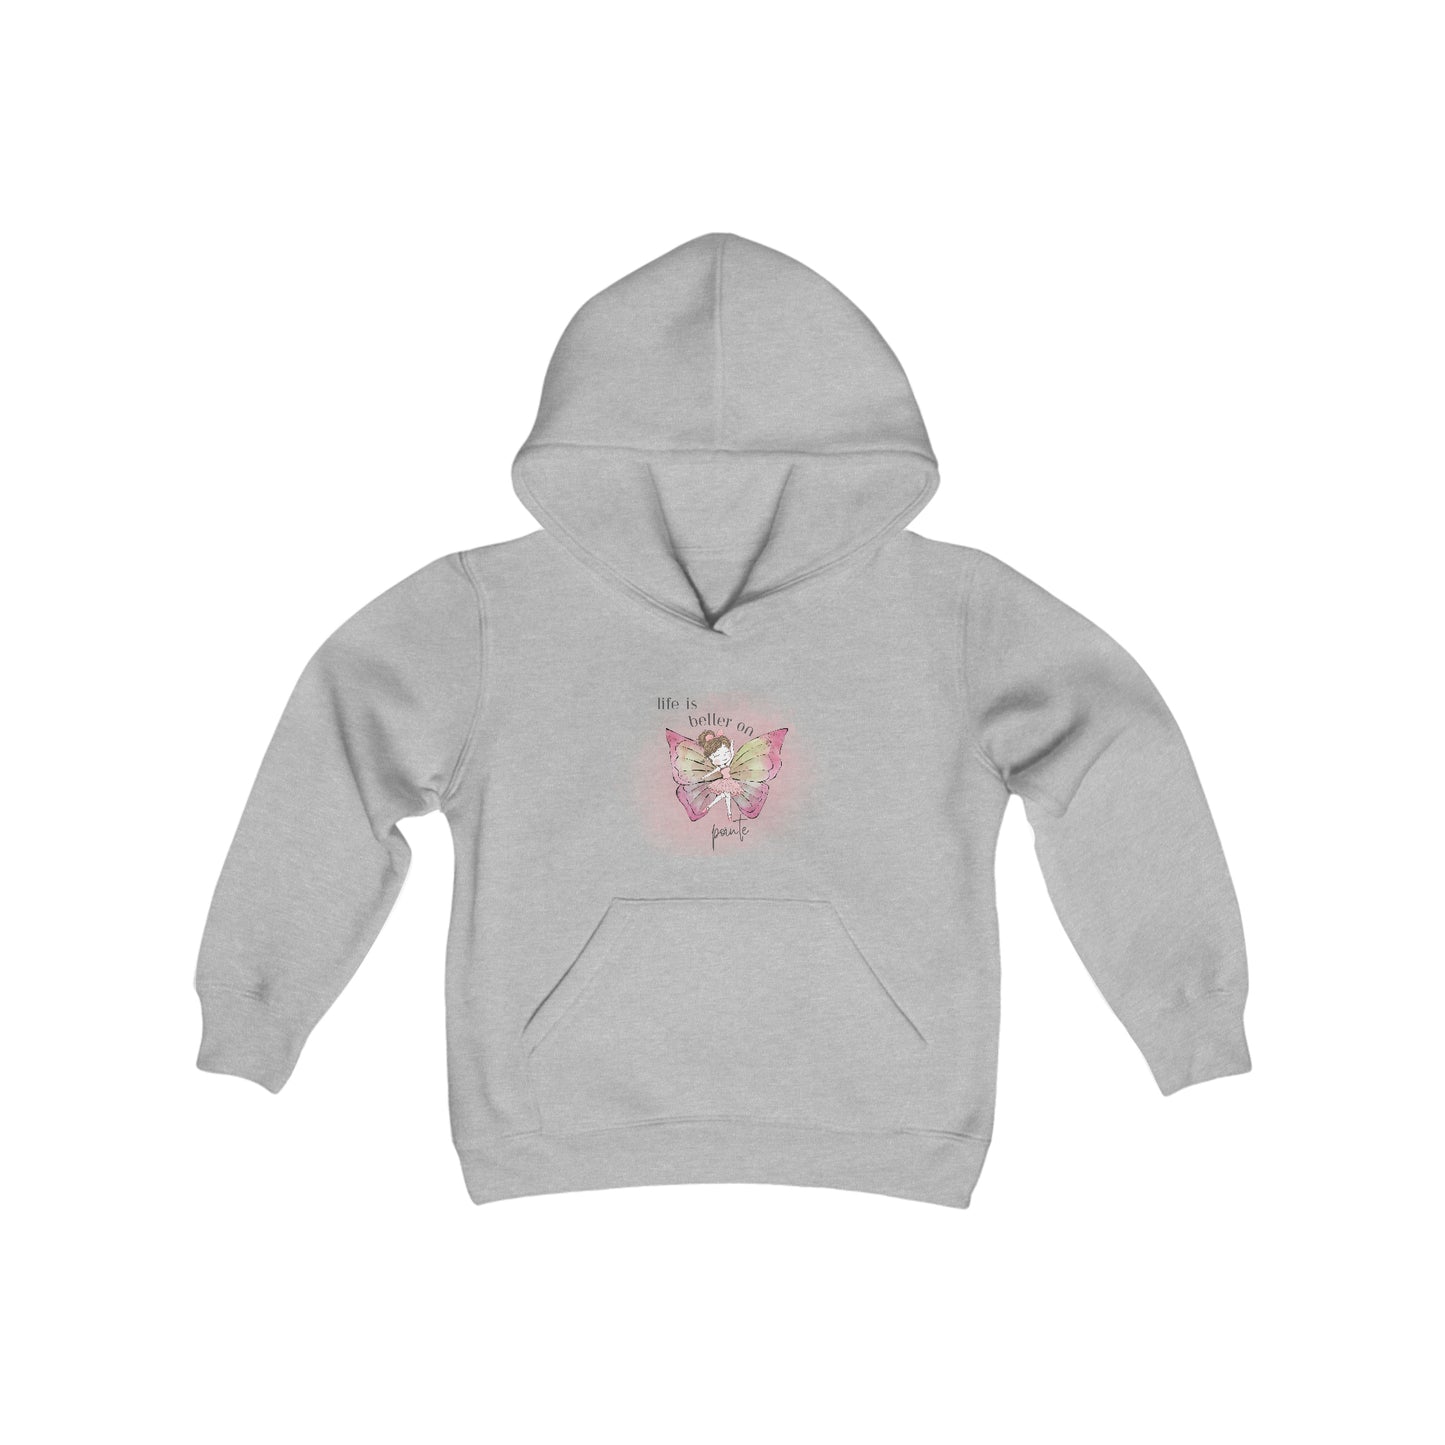 Youth Hooded Sweatshirt - Ballerina With Butterfly Wings - gray